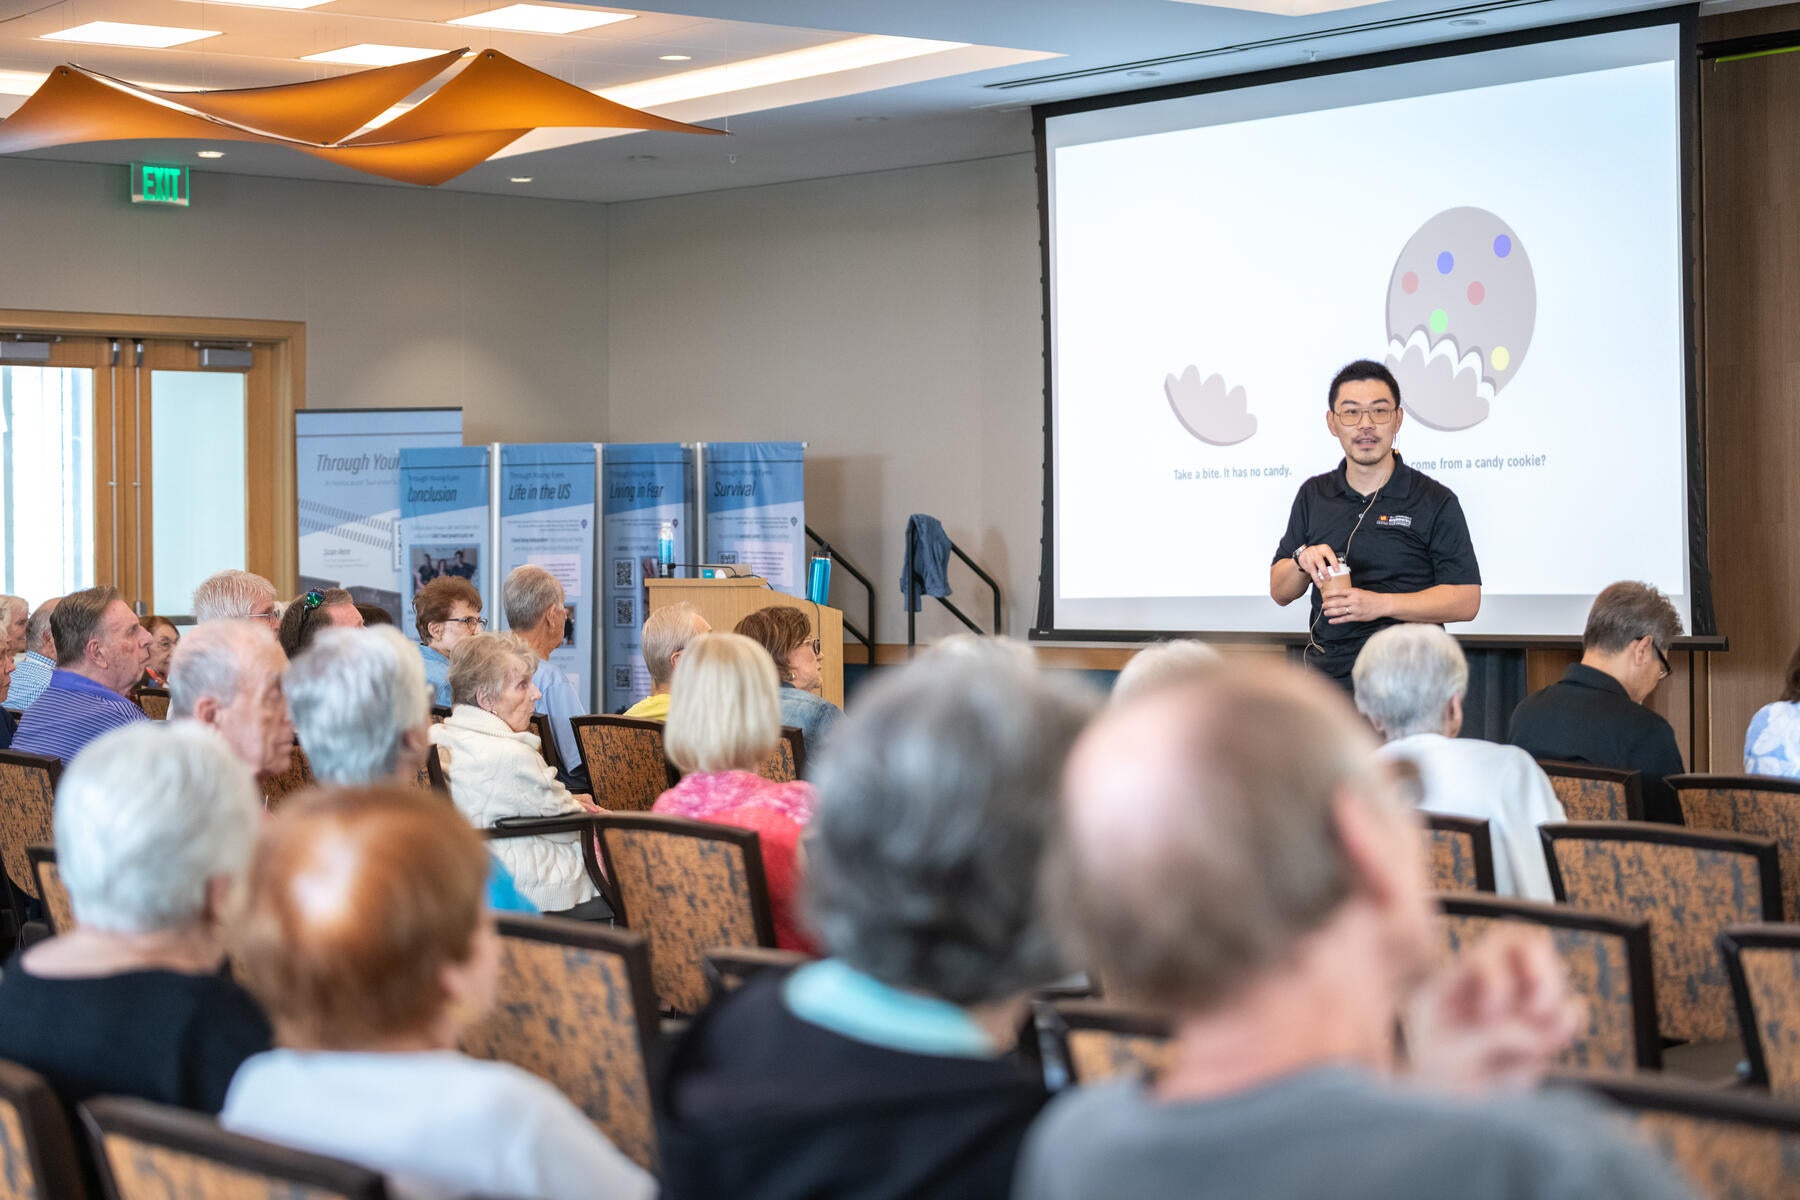 Yezhou “YZ” Yang teaches  “AI and the Joy of Living” to approximately 100 senior citizens in the Lifelong Learning Auditorium at Mirabella at ASU